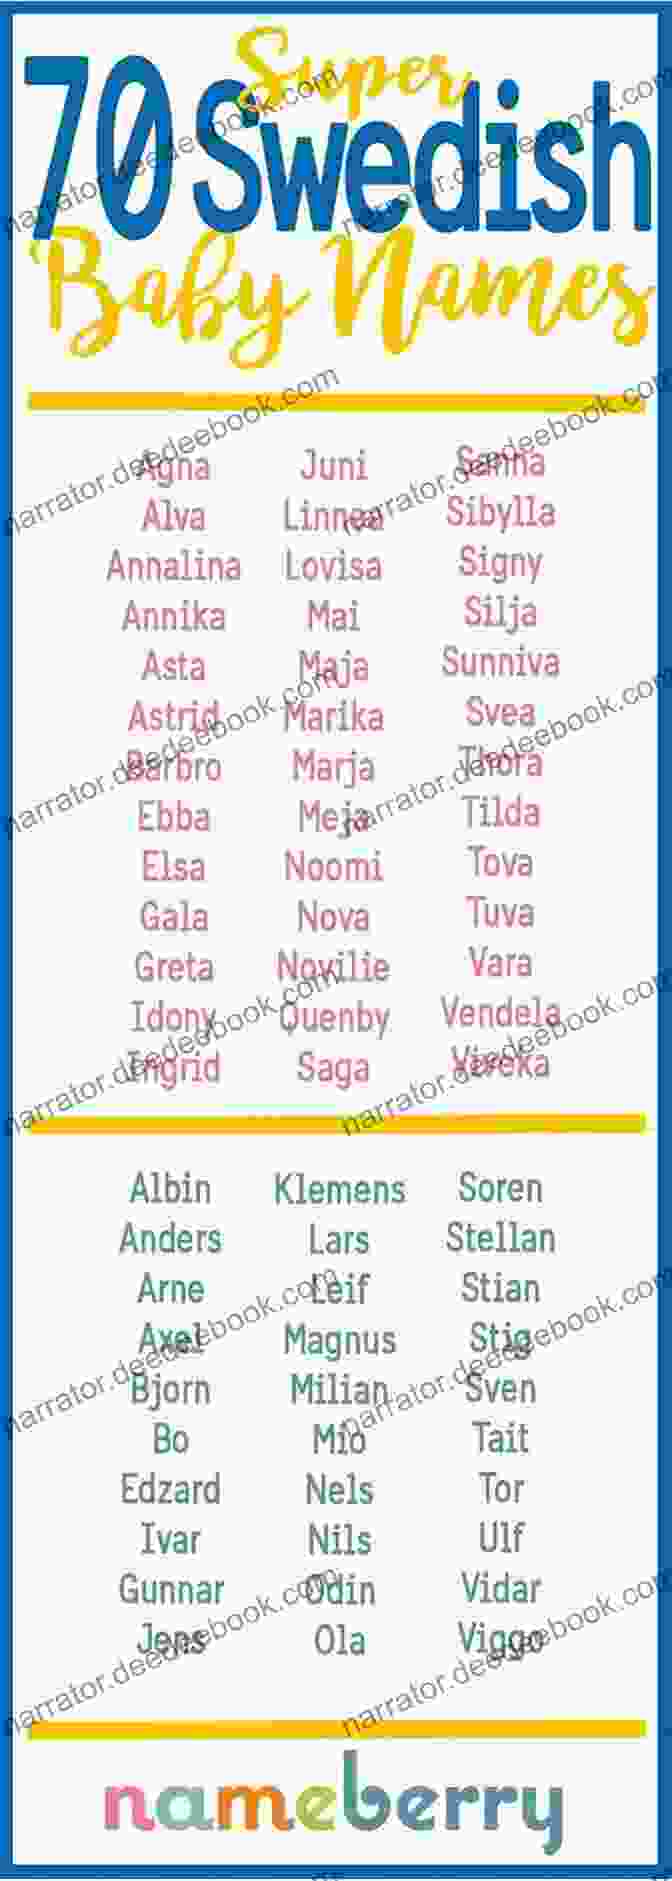 Swedish Baby Names Are Rich In History And Meaning, Evoking The Beauty Of The Scandinavian Landscape And Culture. Swedish Baby Names: Names From Sweden For Girls And Boys